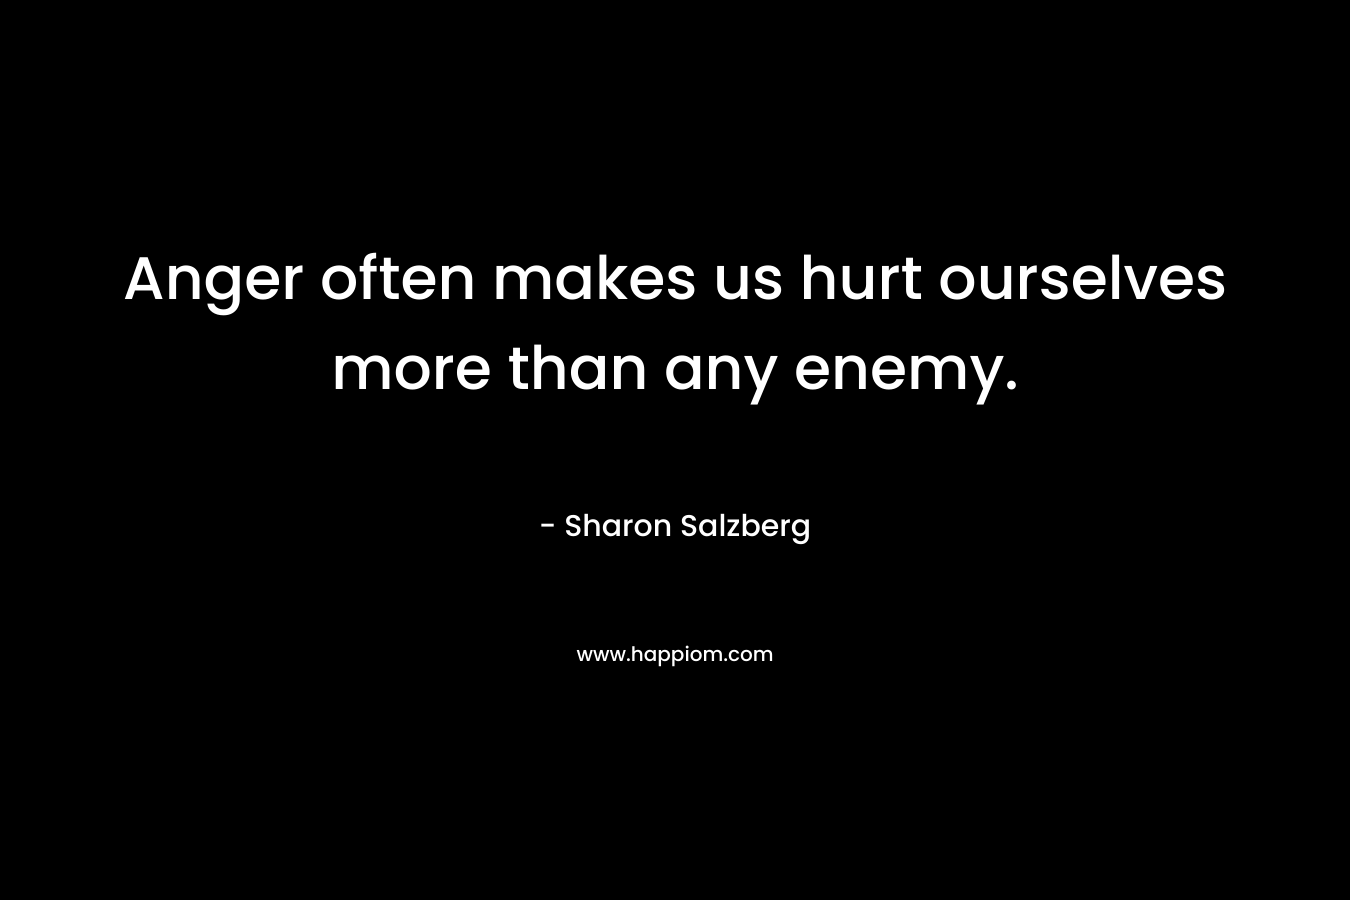 Anger often makes us hurt ourselves more than any enemy.